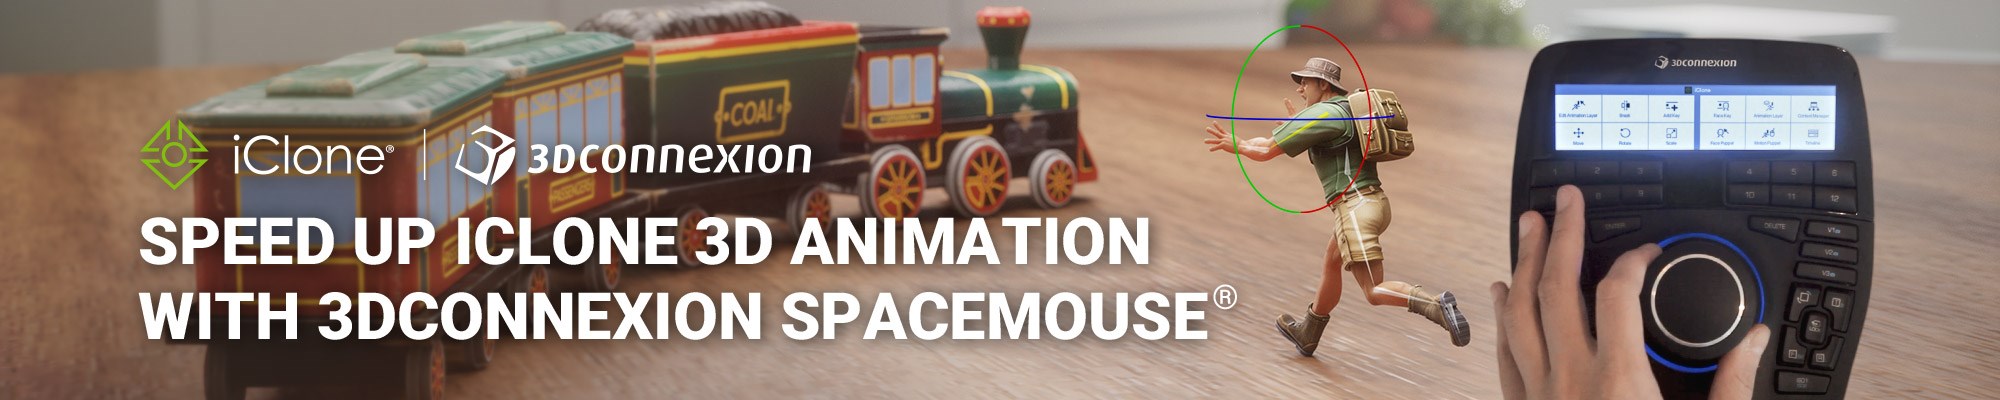 Speed up iClone 3D Animation with 3Dconnexion SpaceMouse